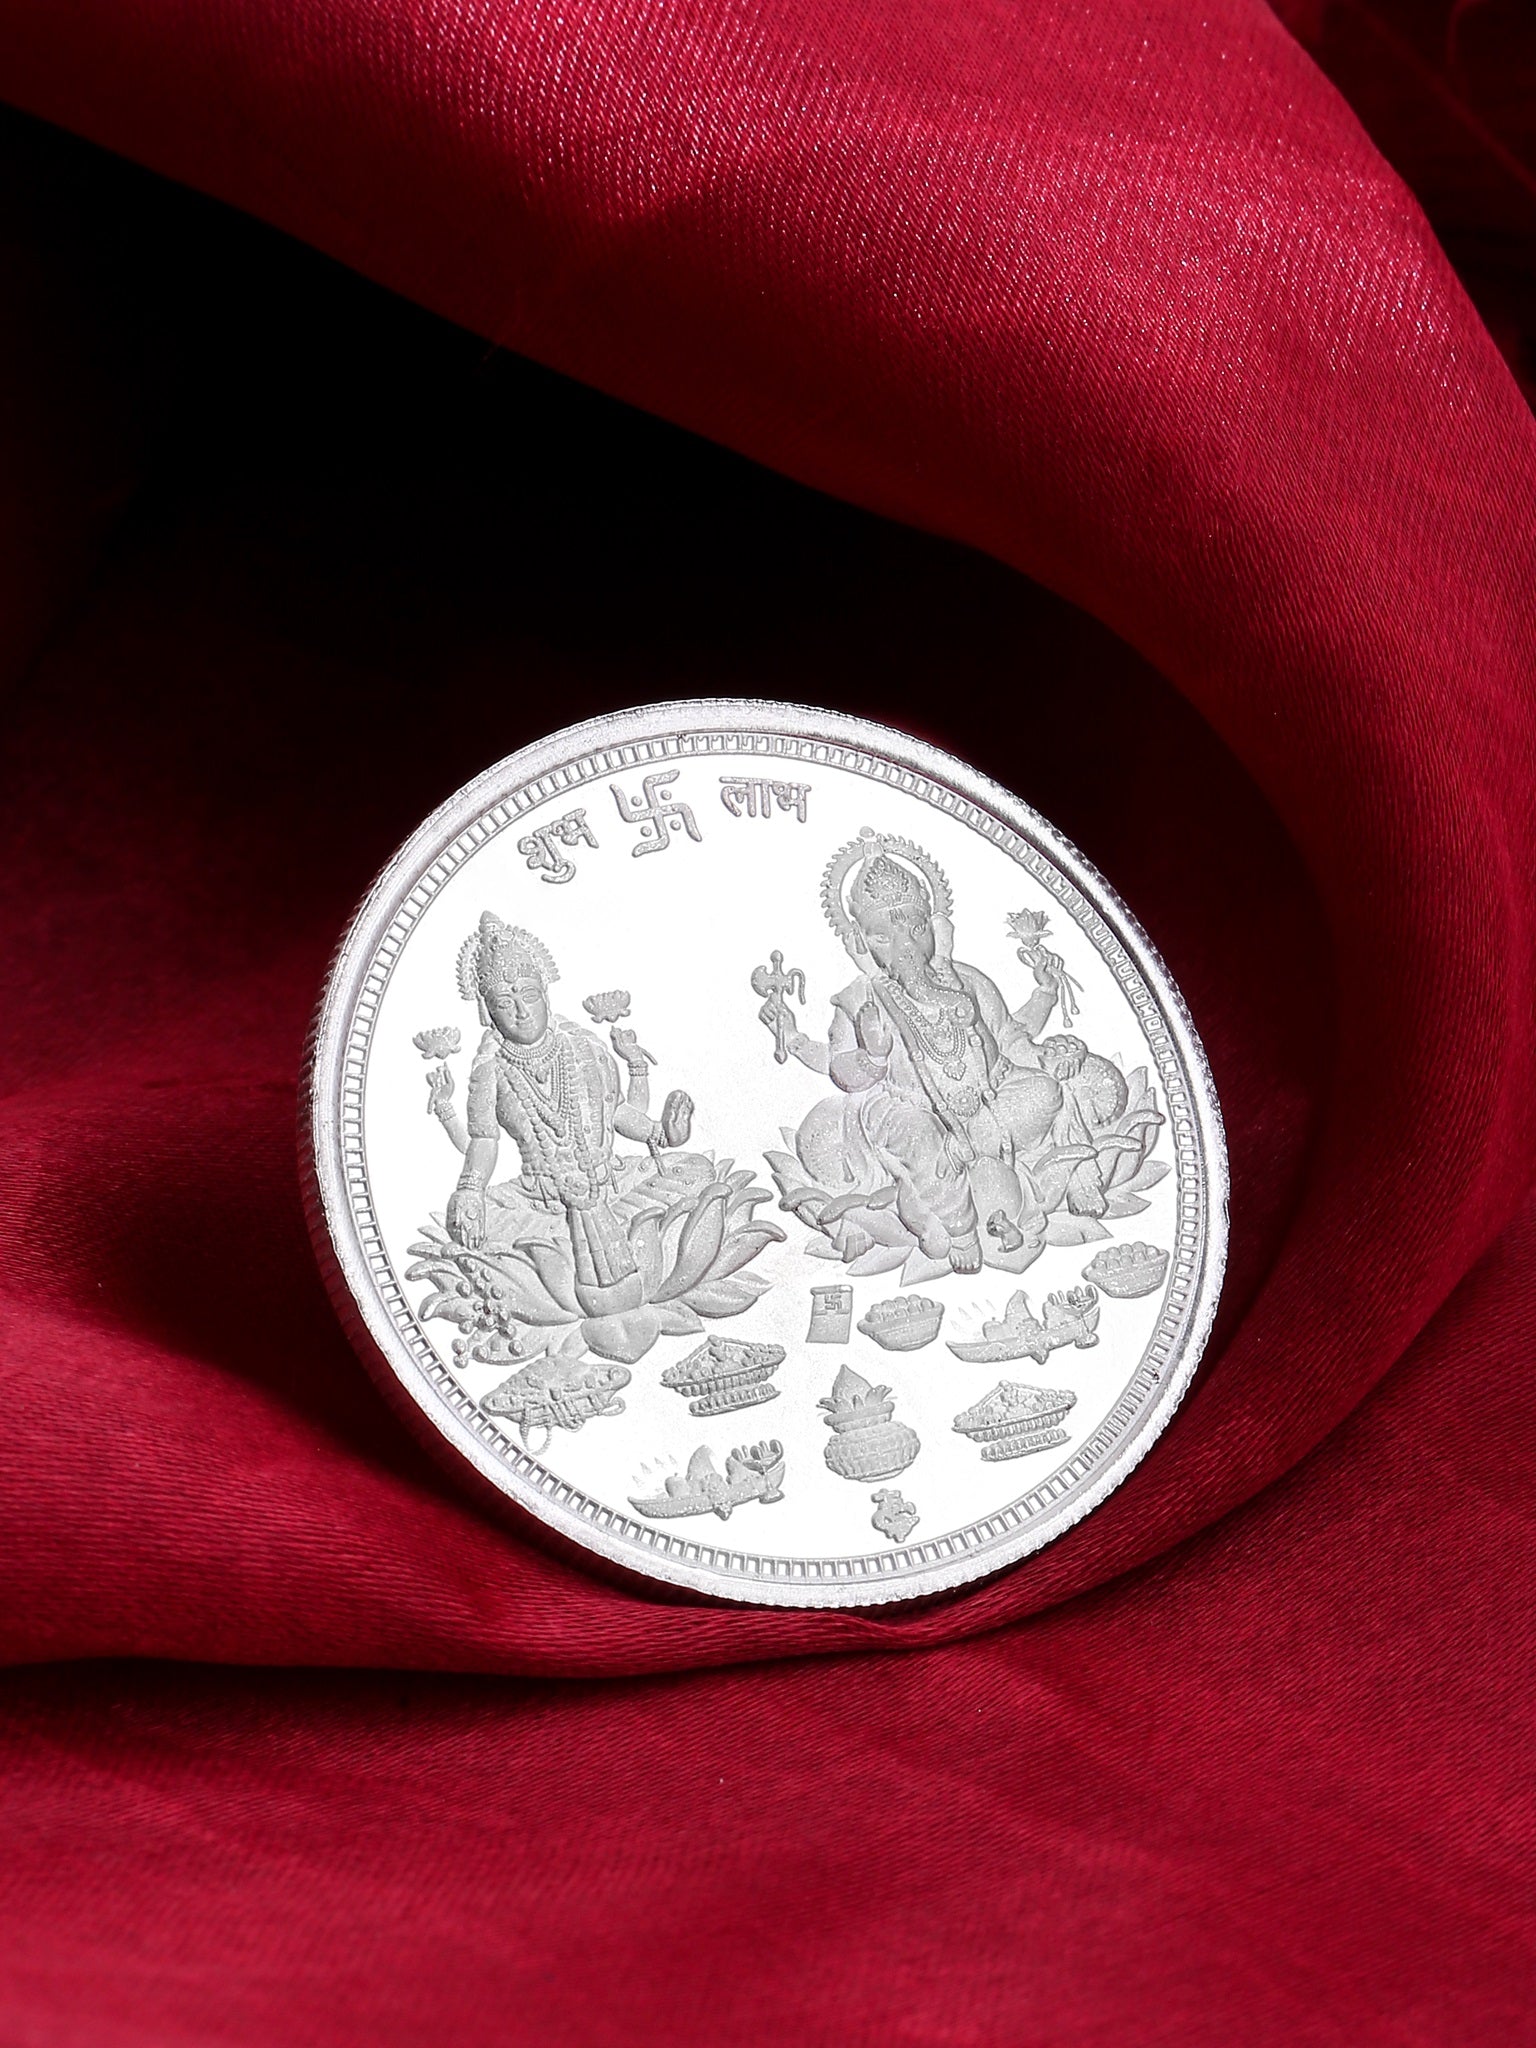 Blessings Abound 50g Pure Silver Laxmi Maa and Ganesh Ji Coin